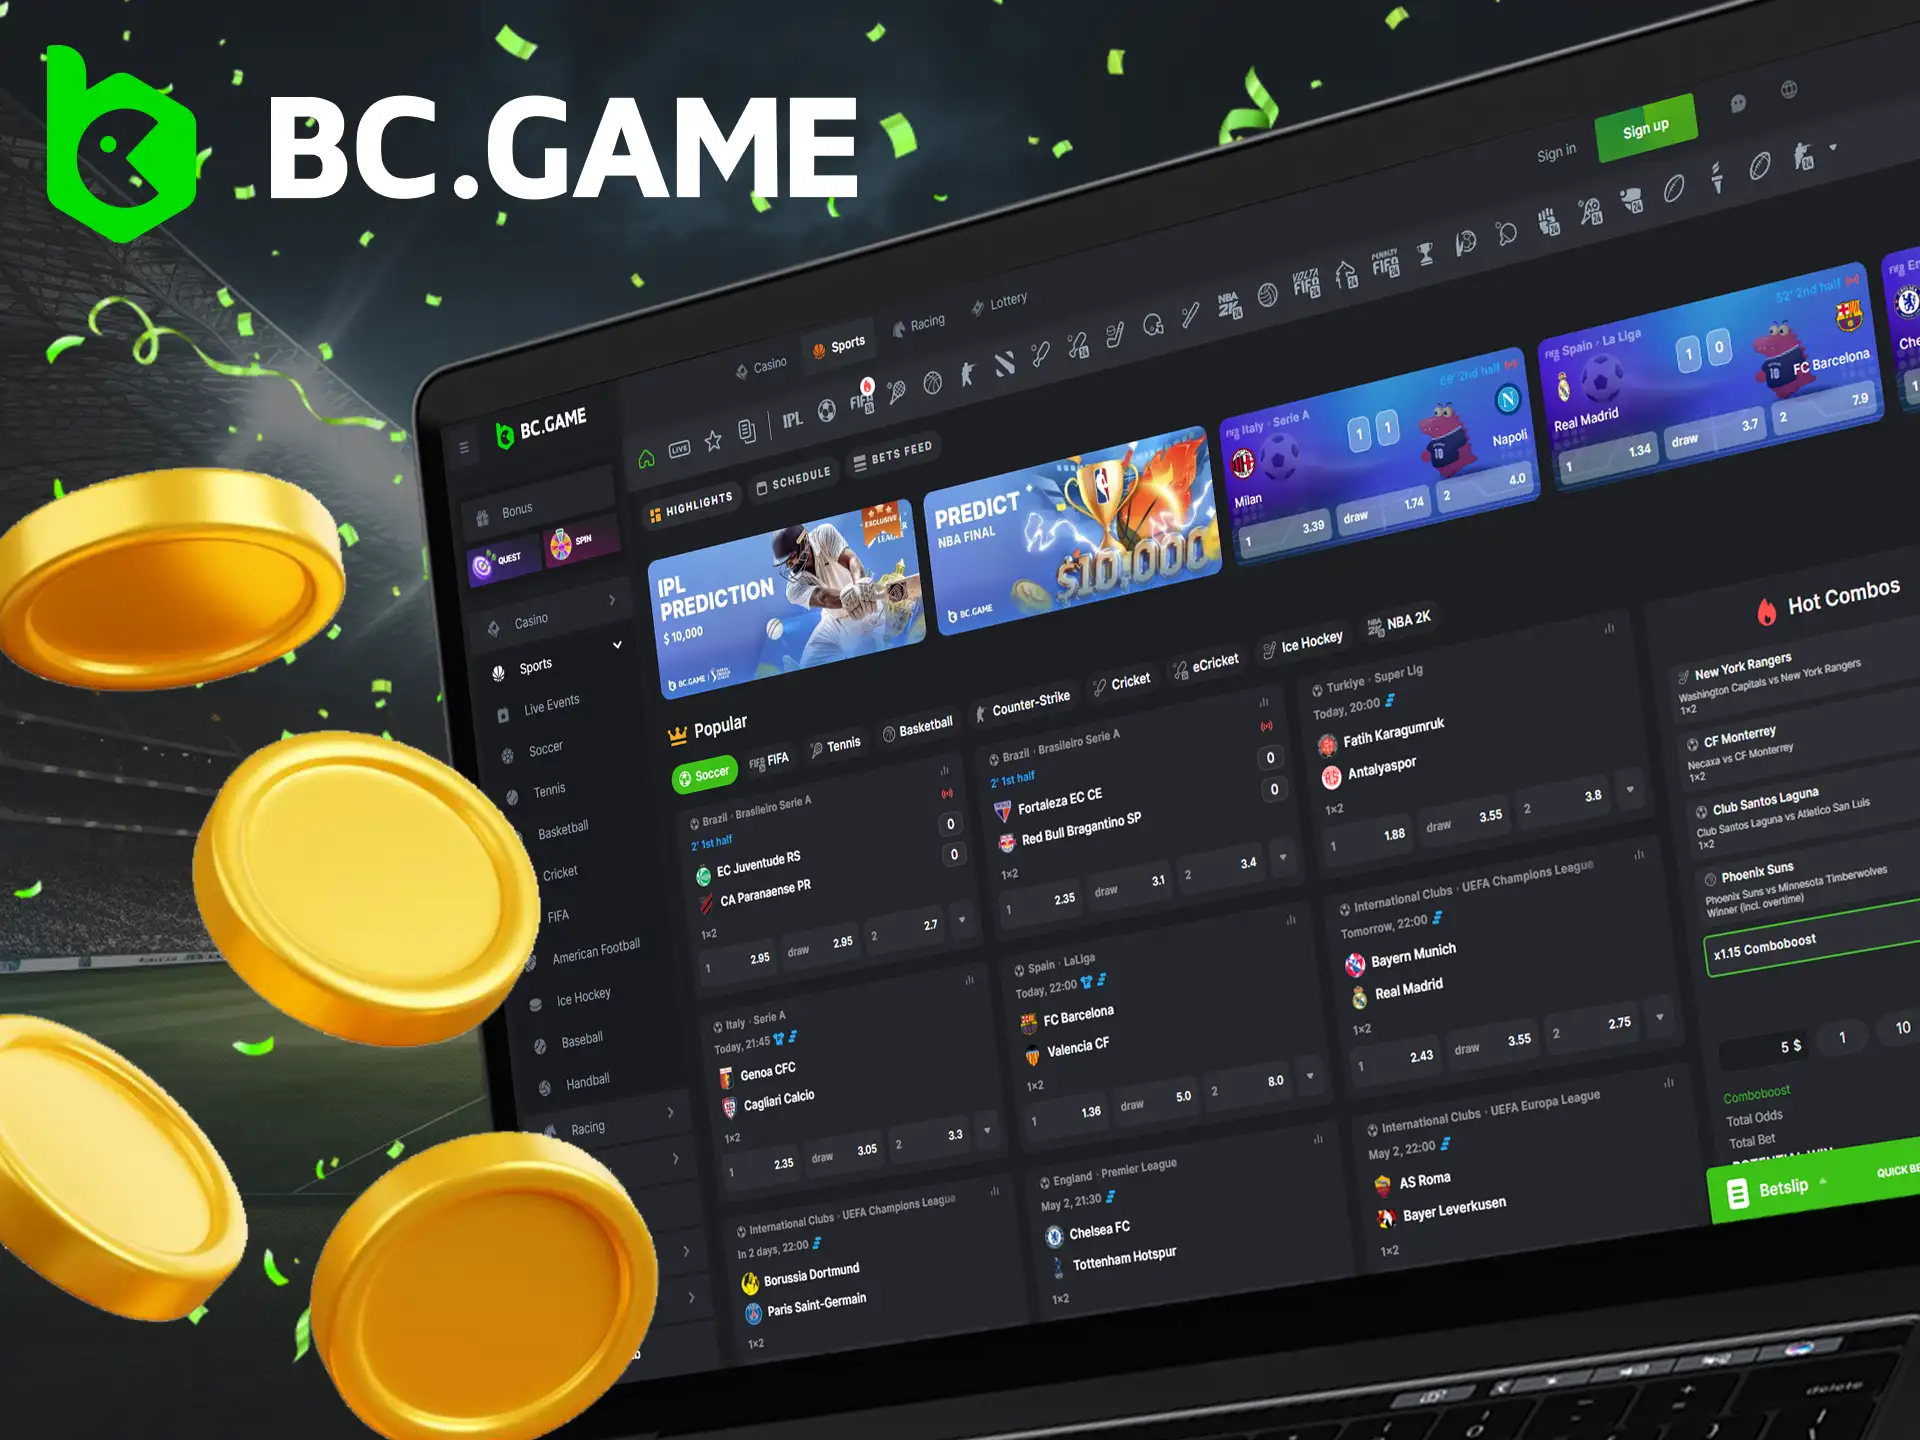 BC.Game India is accessible through your web browser, no software download required.